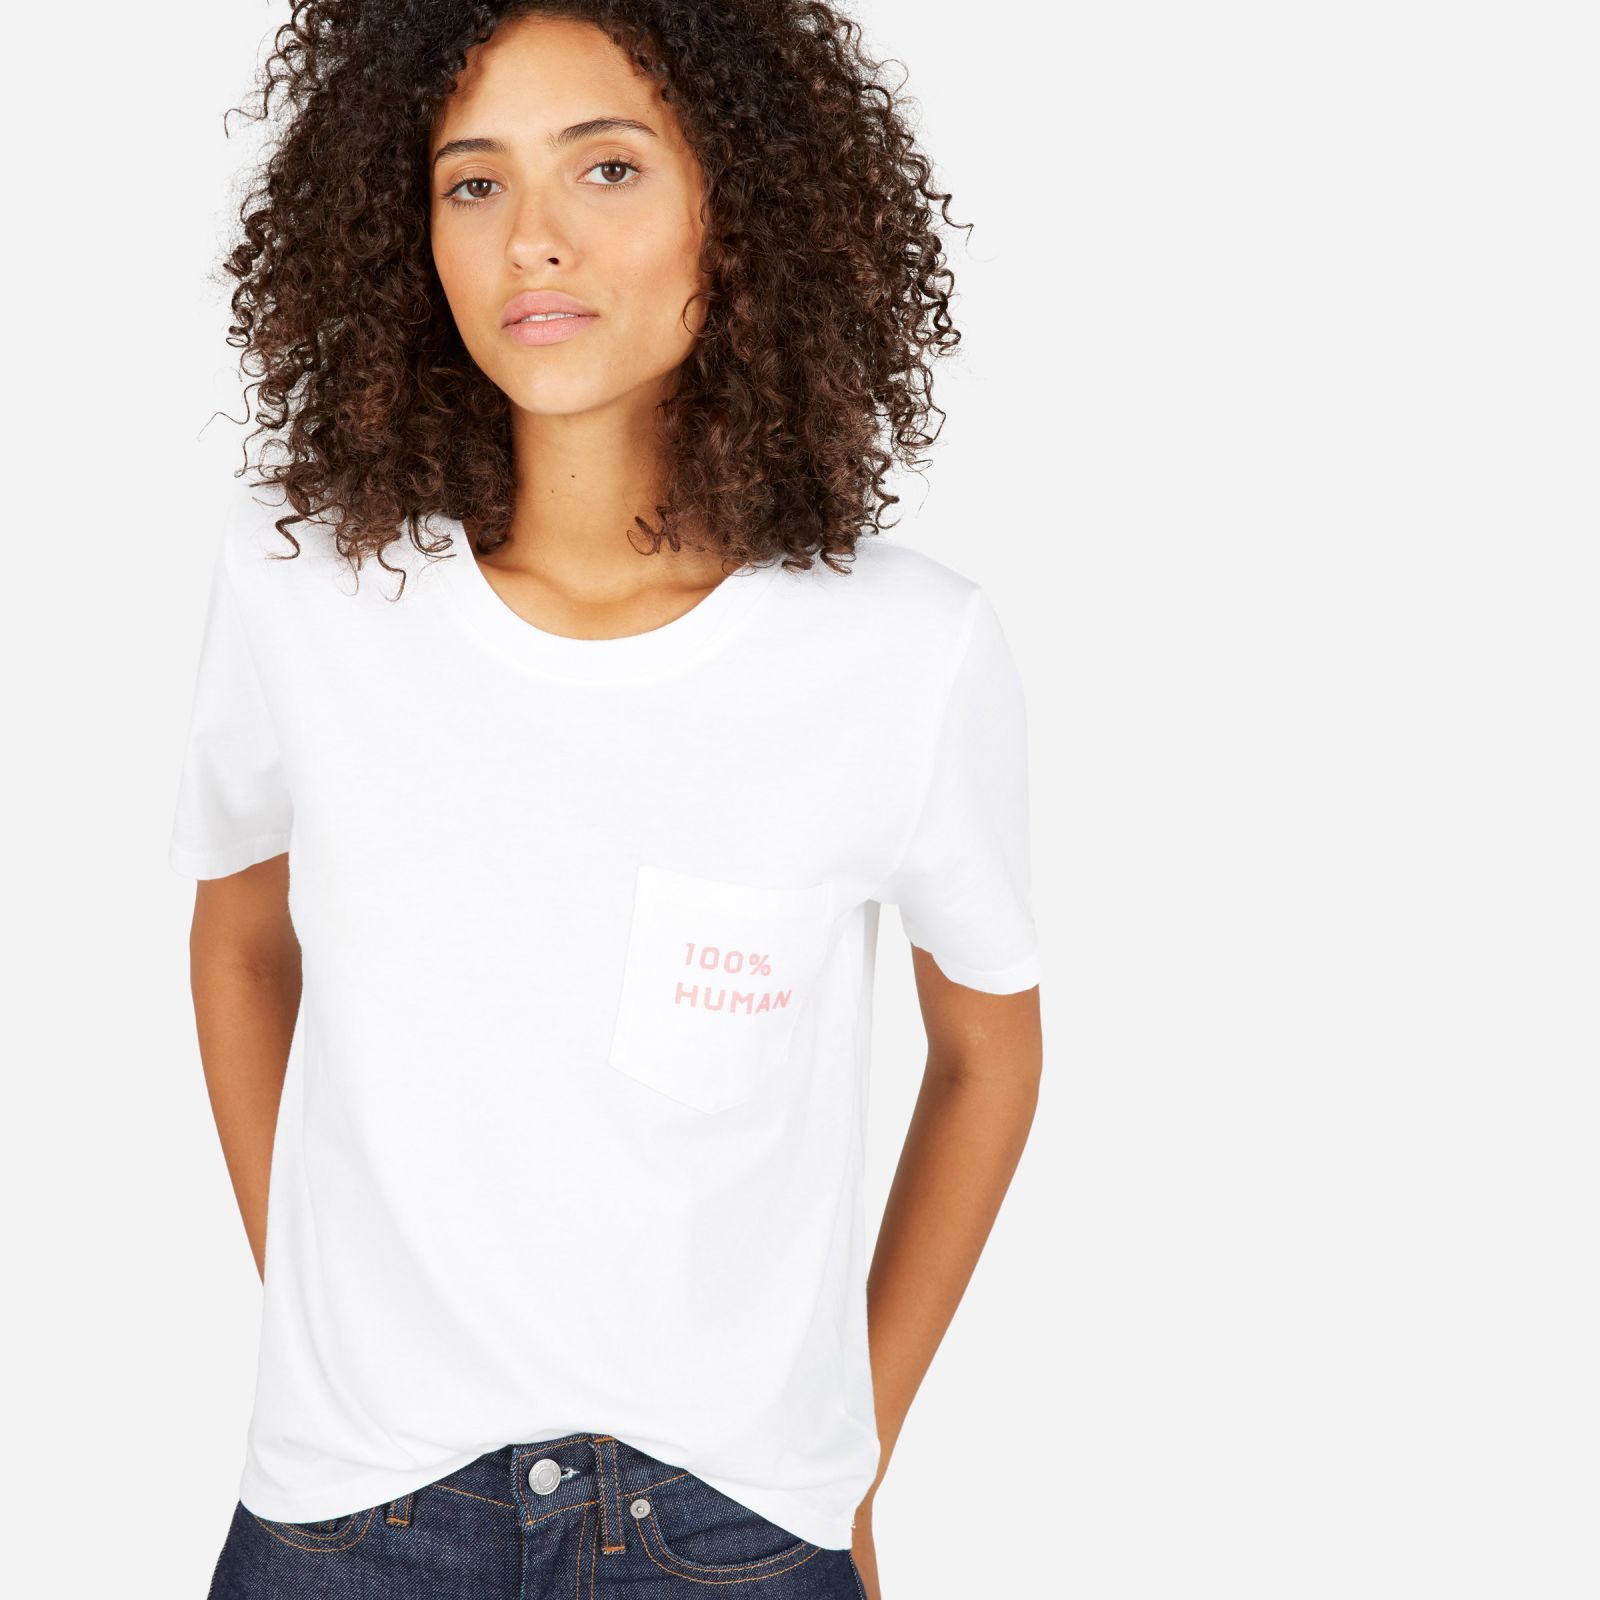 Women's 100% Human Cotton Box-Cut T-Shirt in Small Print by Everlane in White / Pink, Size XXS | Everlane